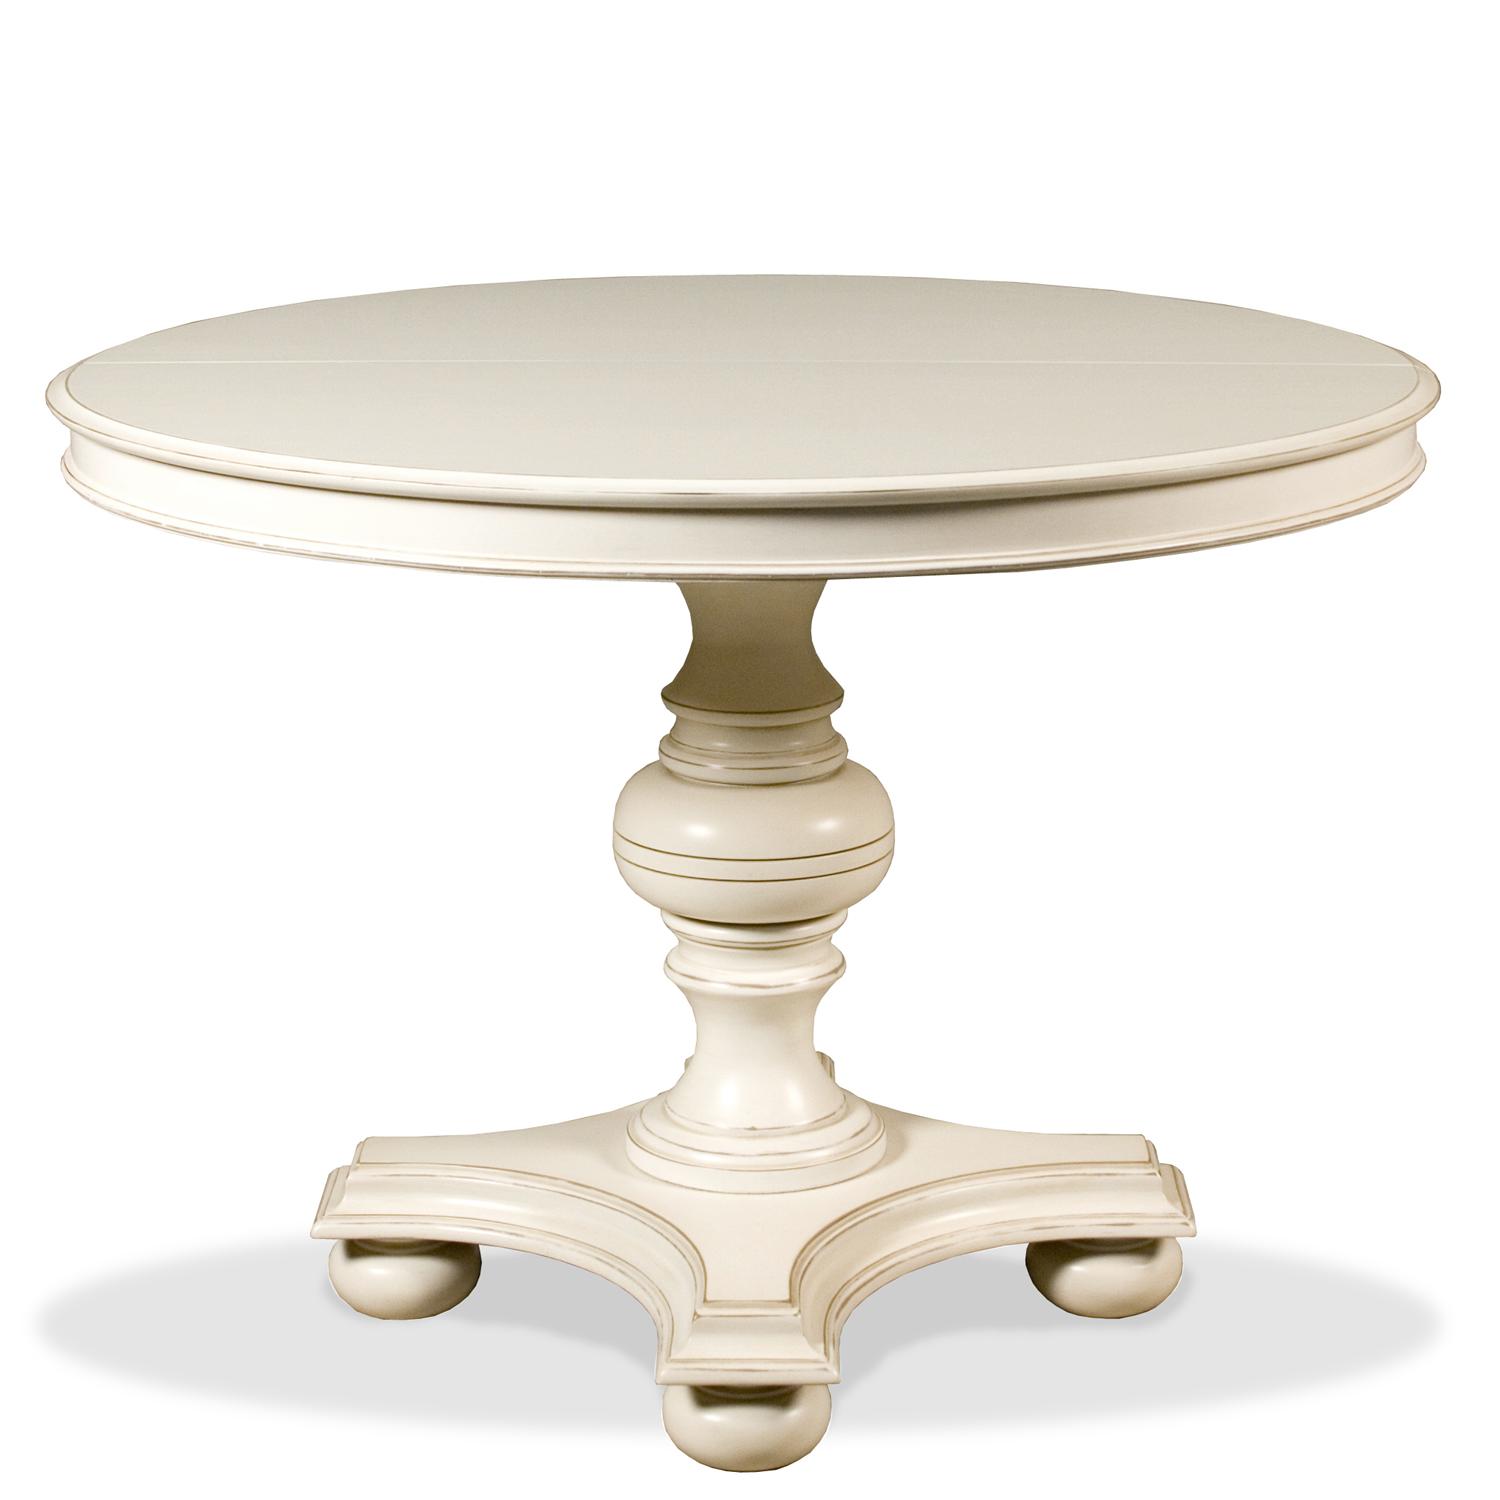 Round dining table base | Hawk Haven